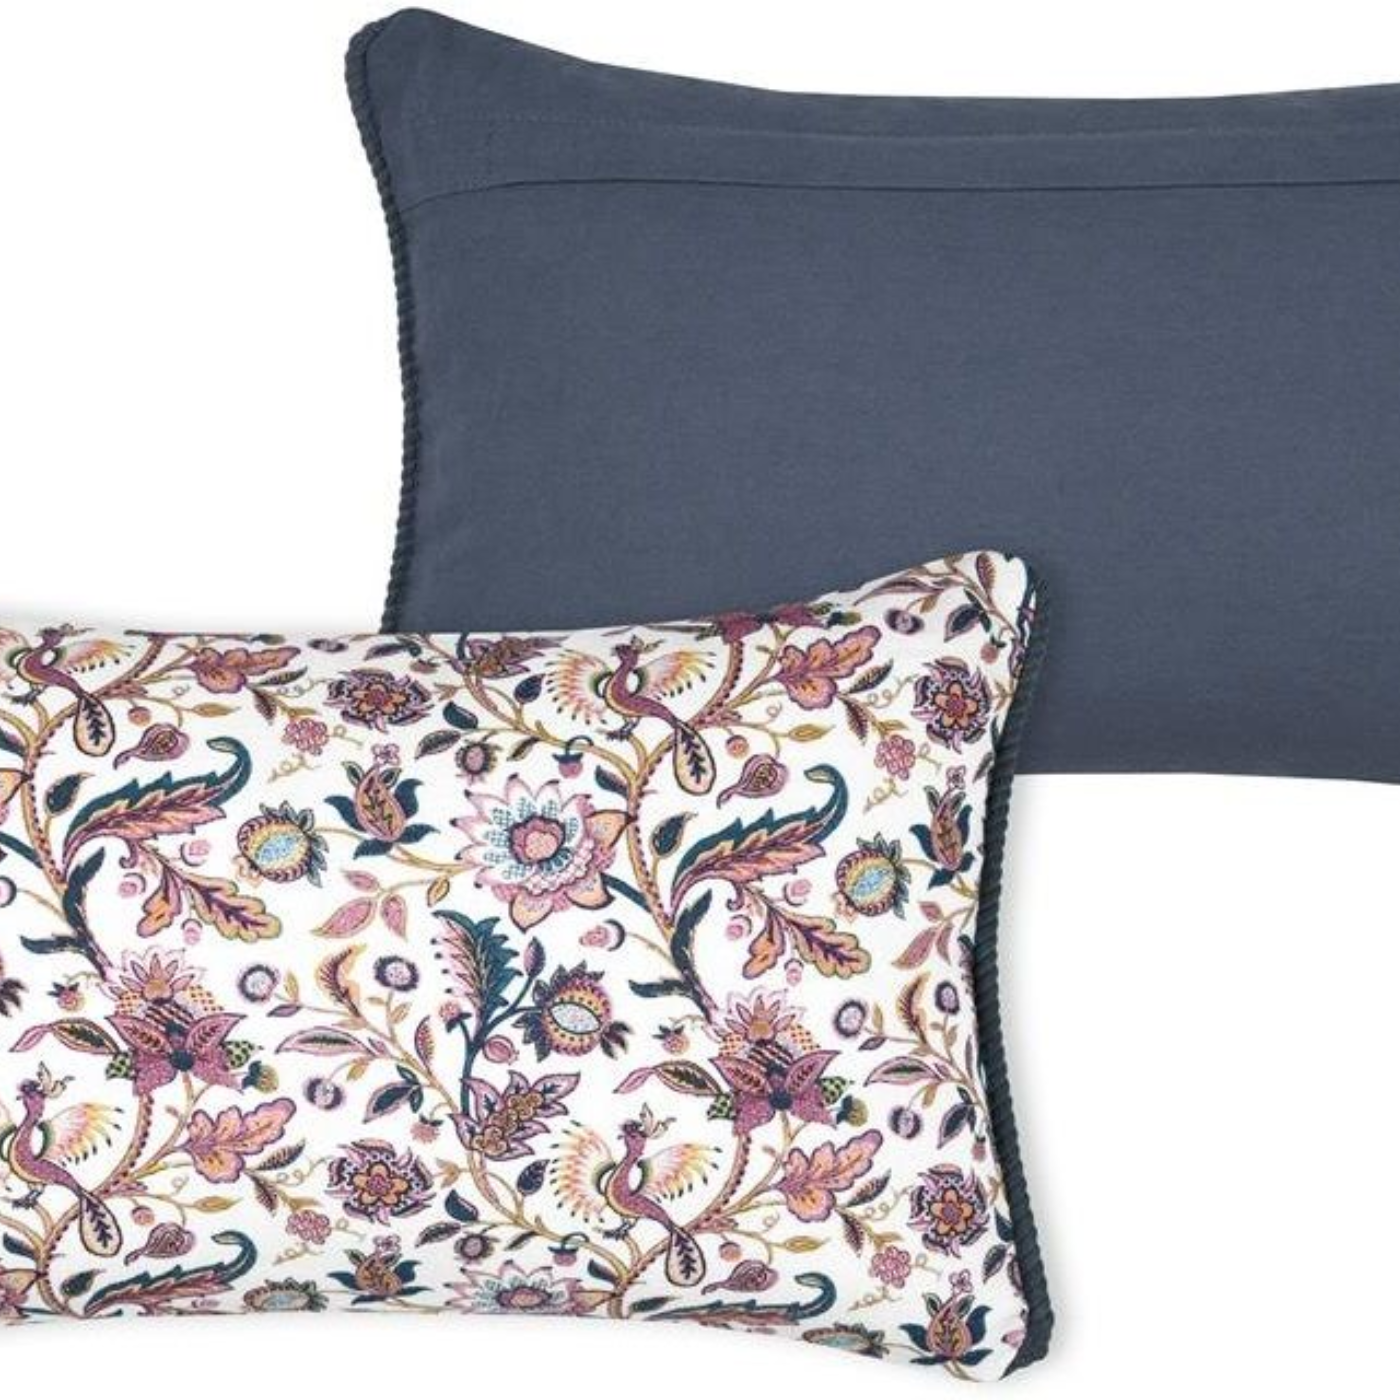 Front and Back on cushion. Back is navy in colour and front is floral motive pattern in purple on white background